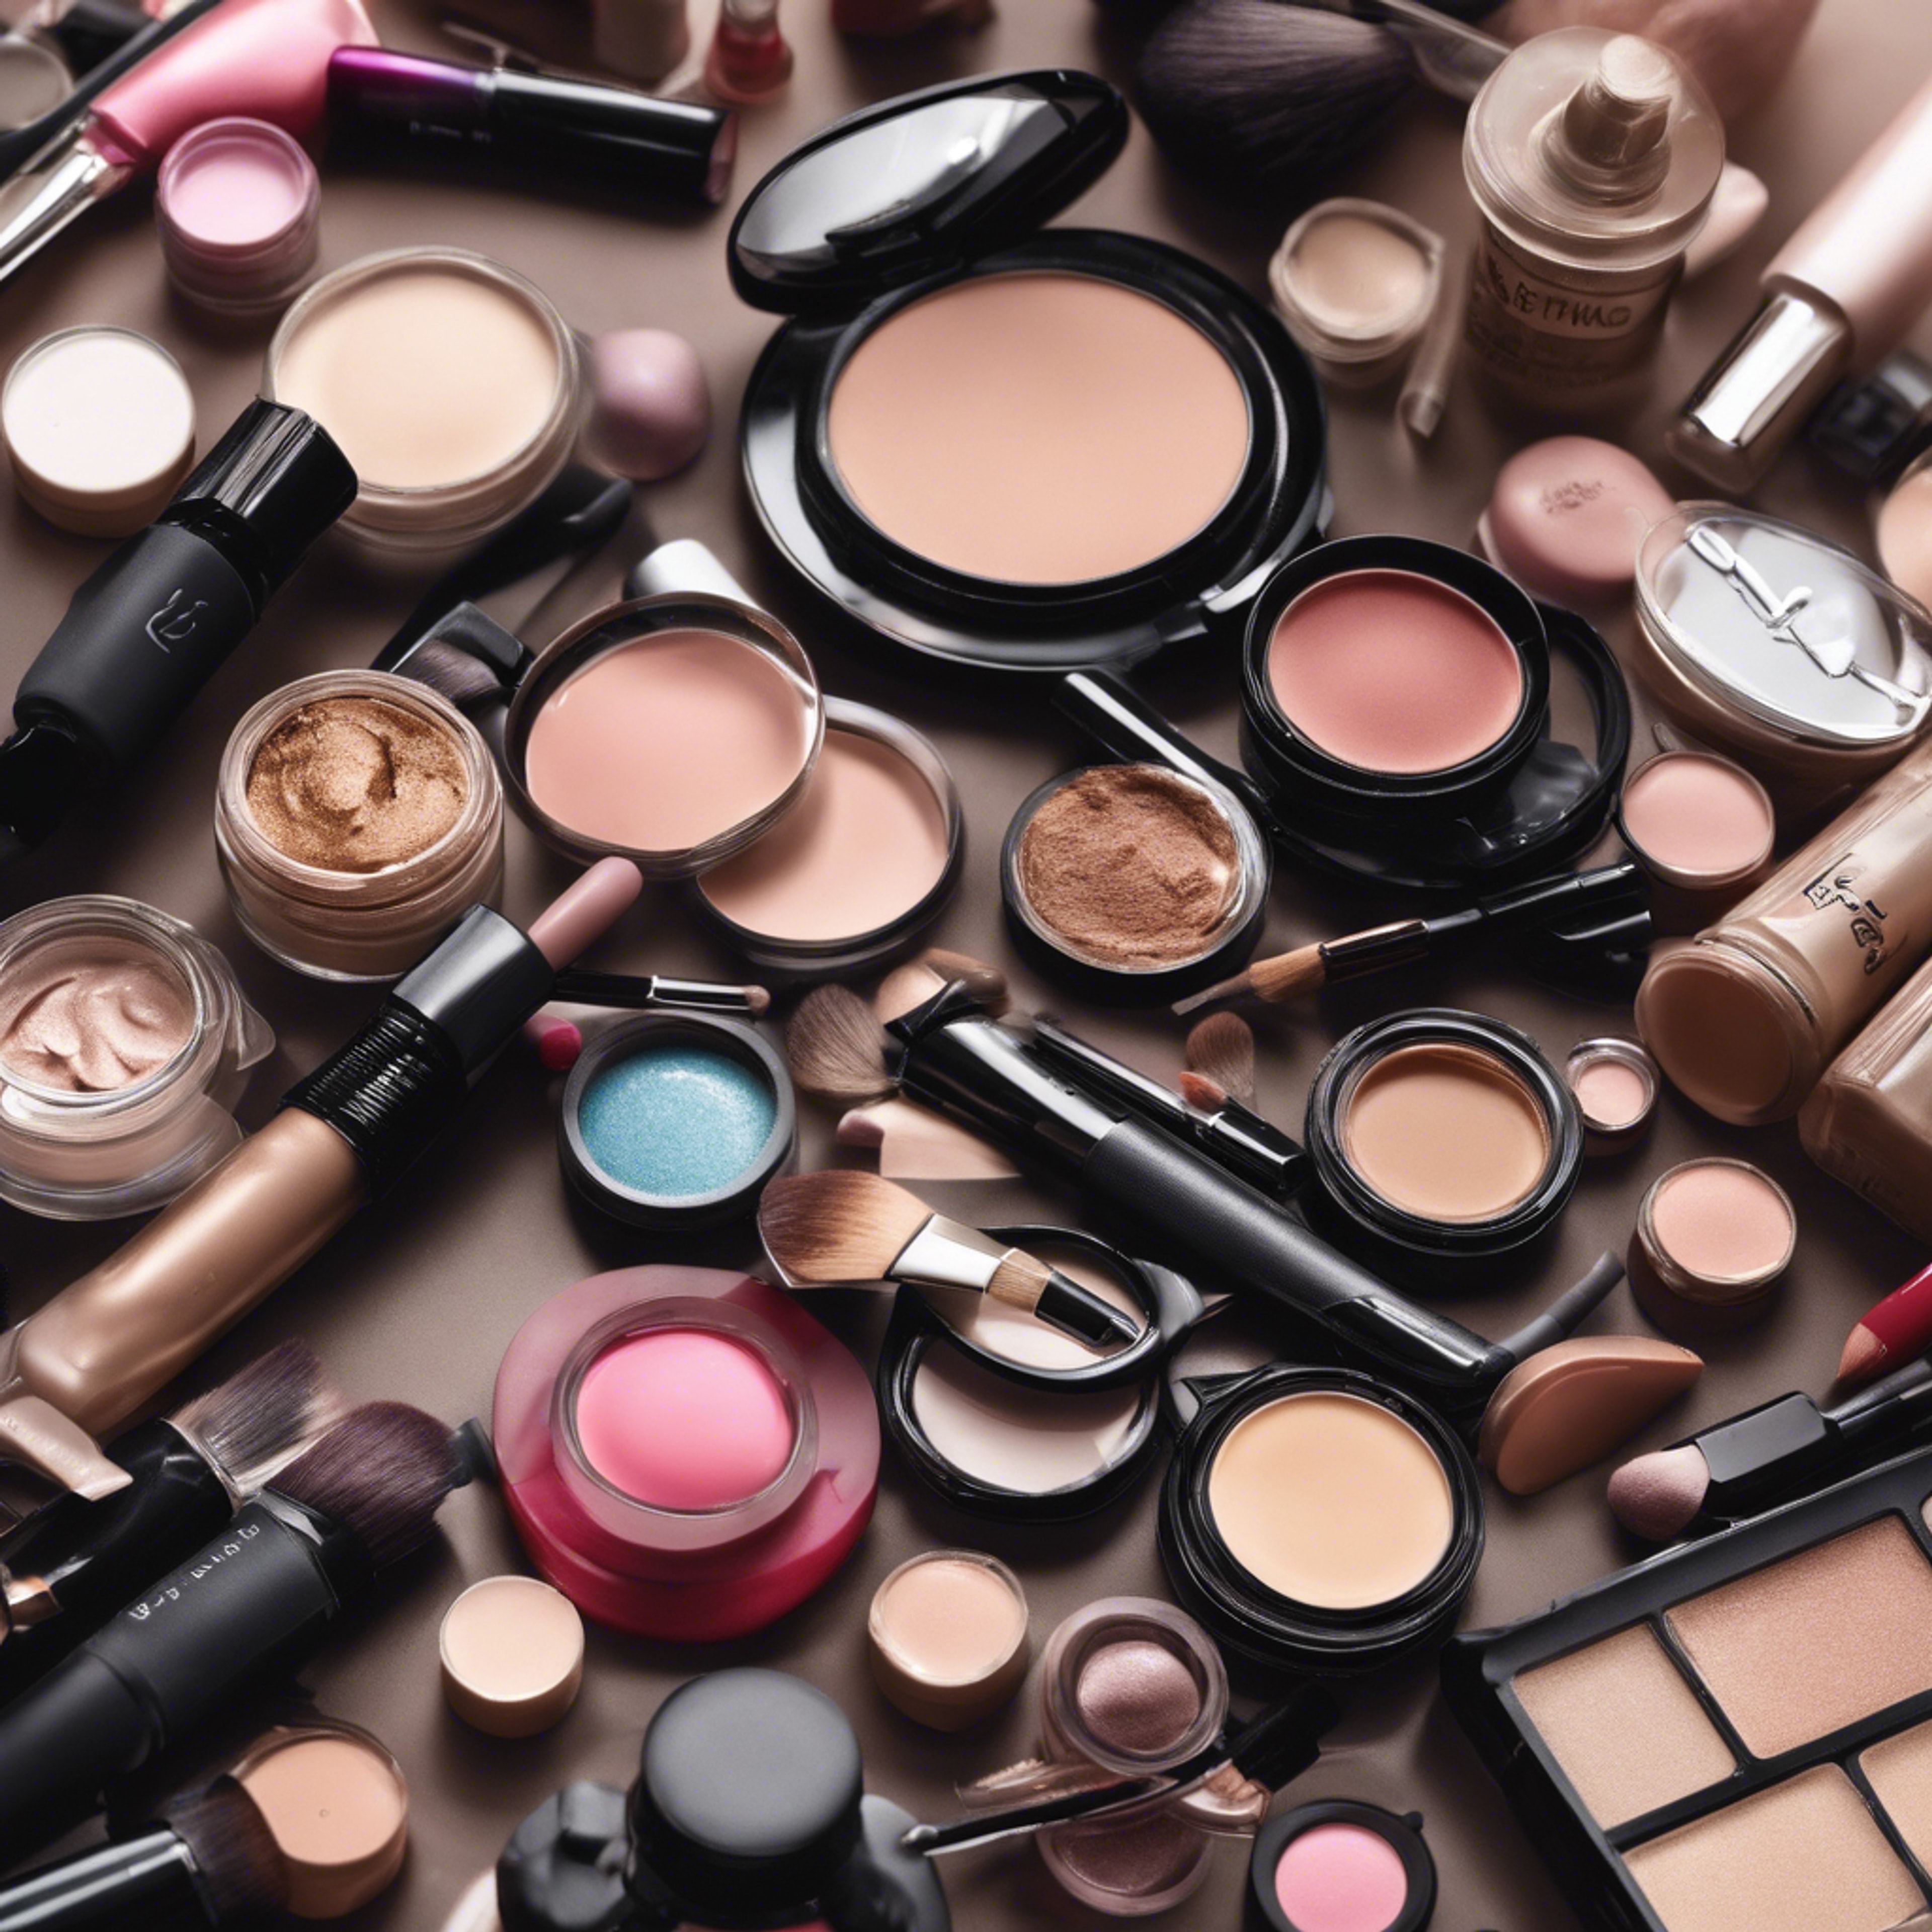 A makeup artist's table crowded with various brands of cosmetics ranging from foundation to lip gloss.壁紙[1b8937cb2e6649abadfd]